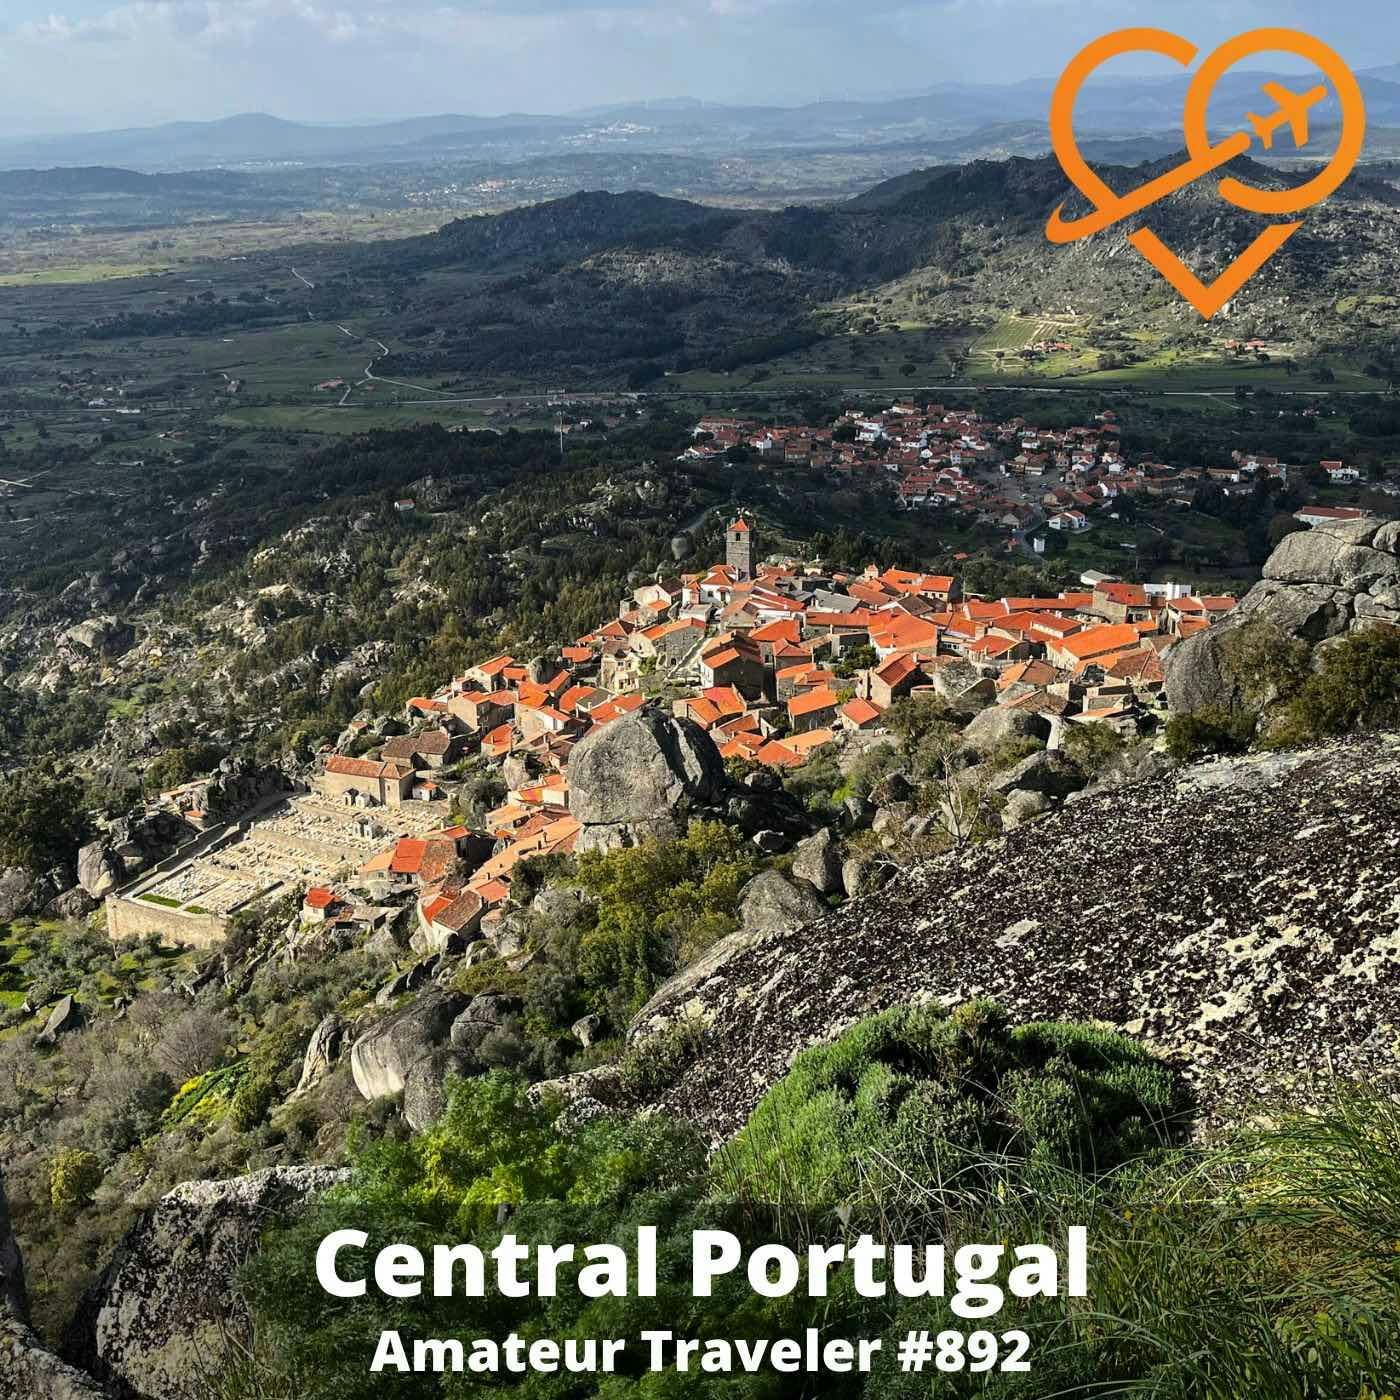 AT#892 - Travel to Central Portugal